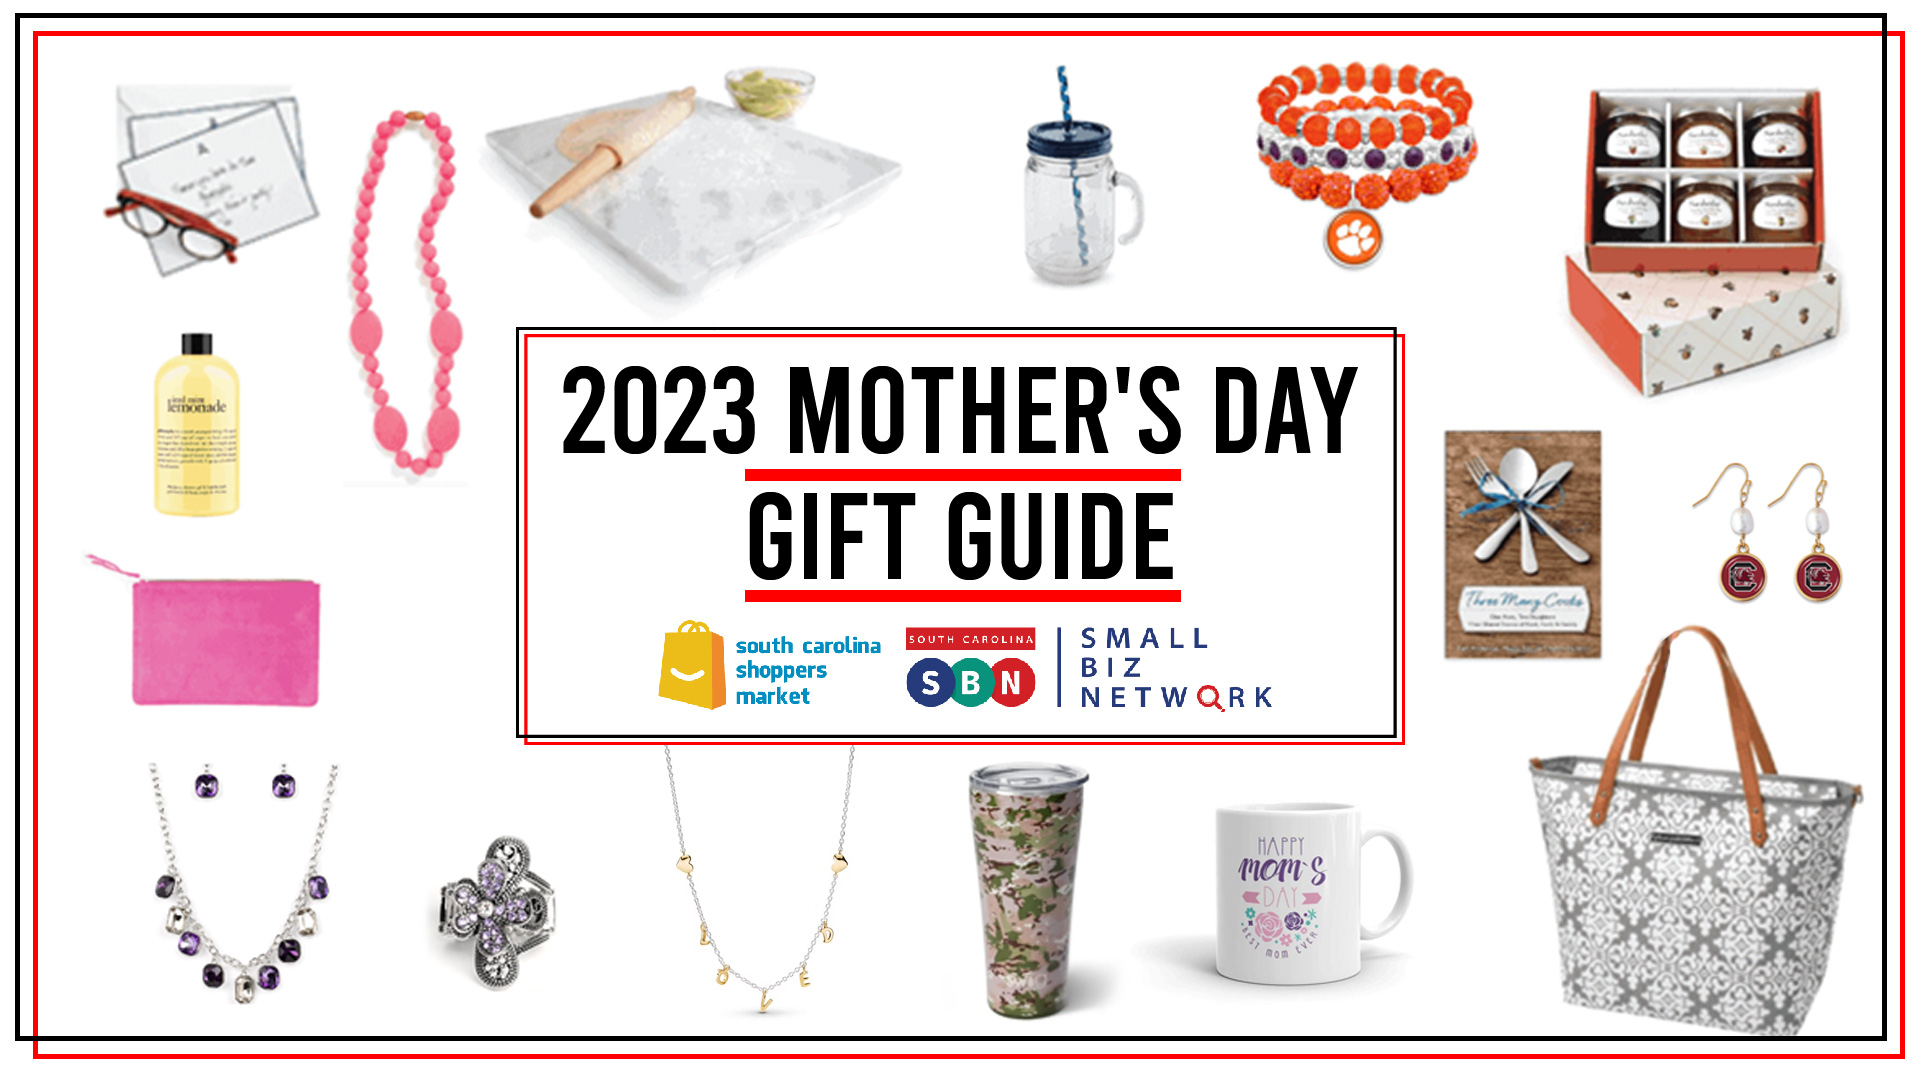 South Carolina Mothers Day Gift Guide Promotion-01